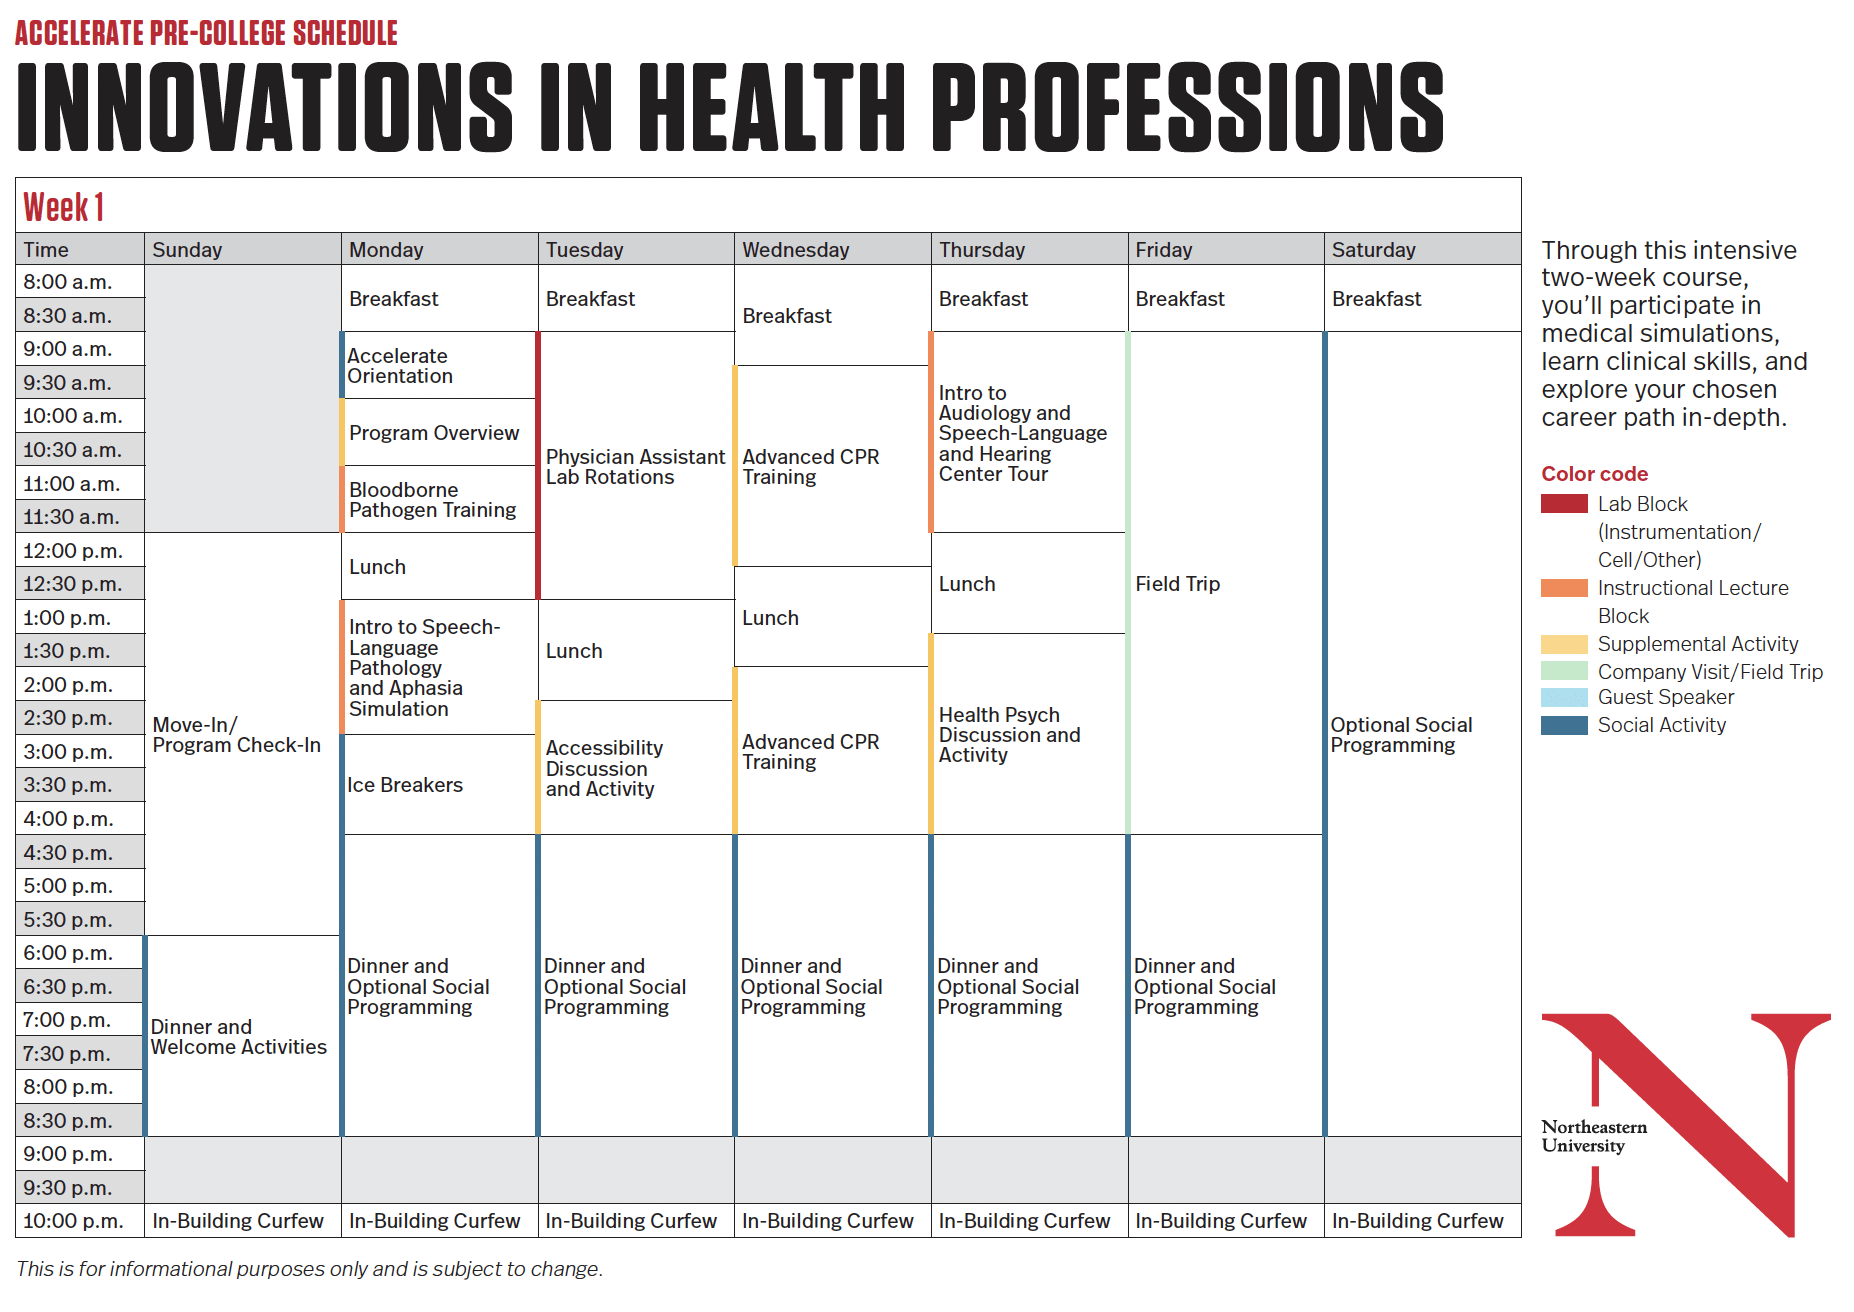 Sample Schedule of the Innovations in Health Professions program